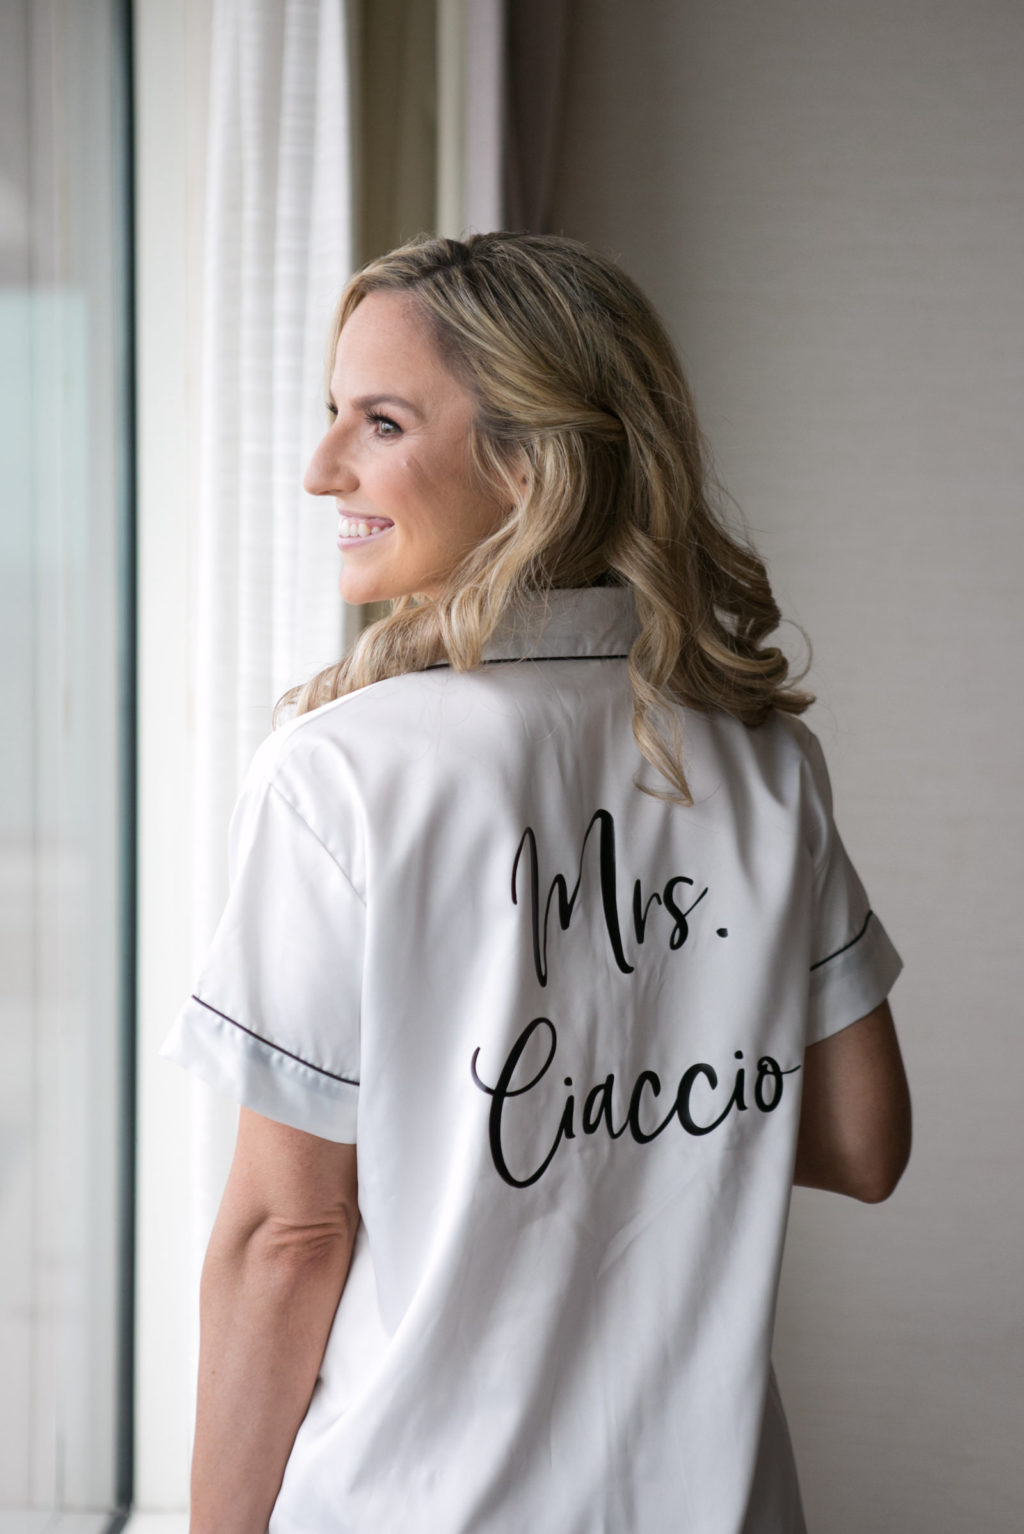 Bridal Pj's | Day of Wedding Getting Ready Outfit | Mrs. Pajamas